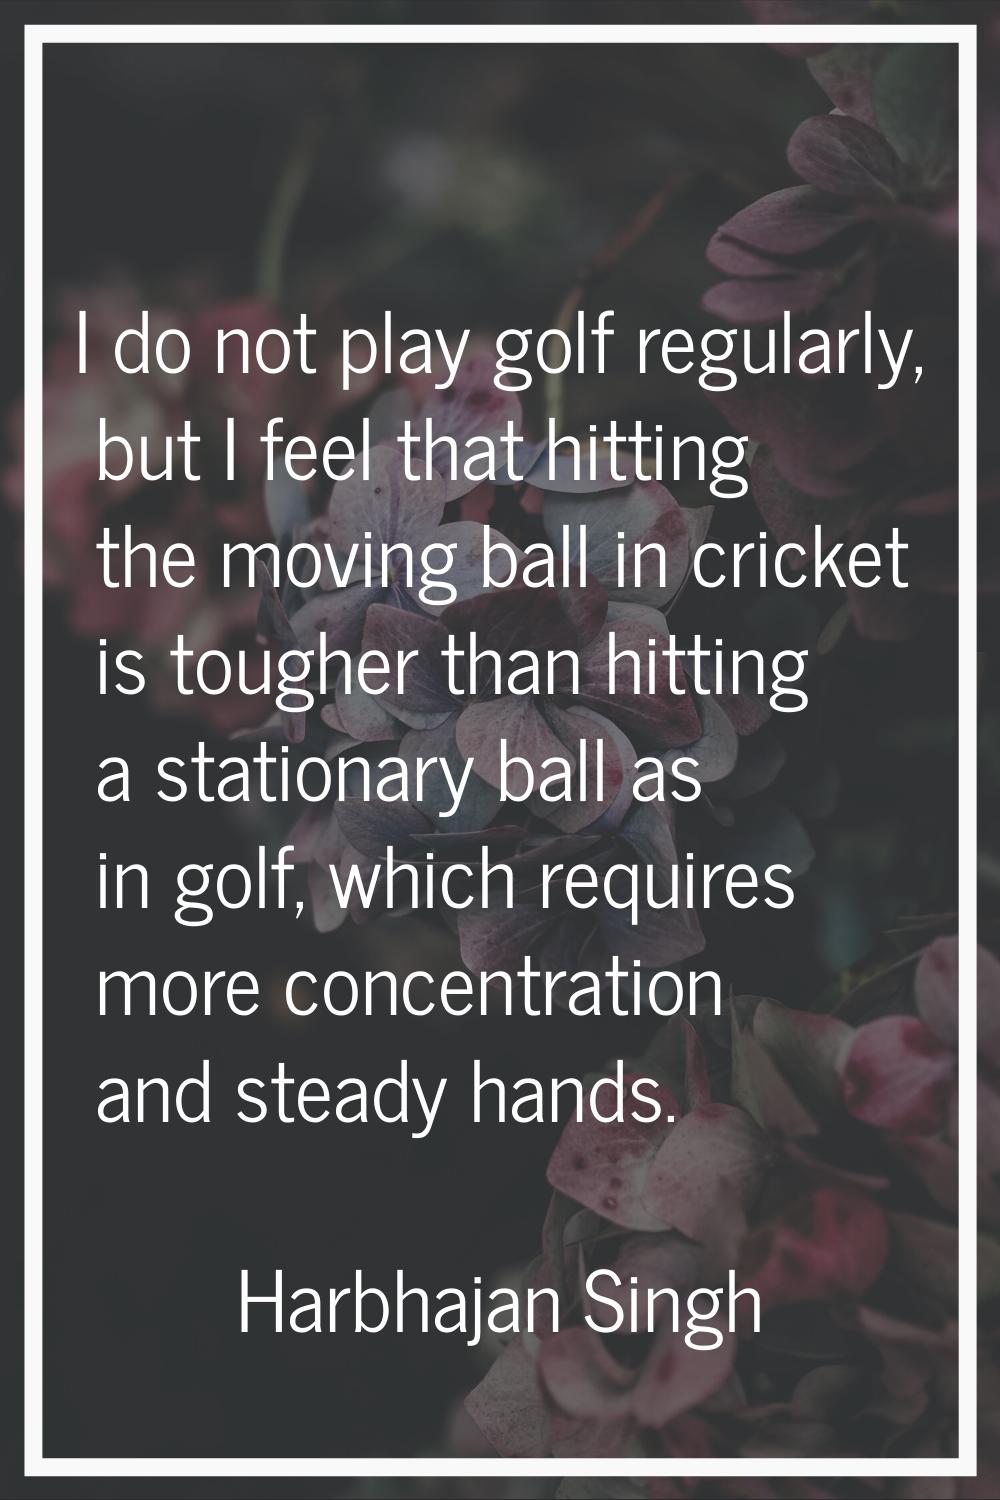 I do not play golf regularly, but I feel that hitting the moving ball in cricket is tougher than hi